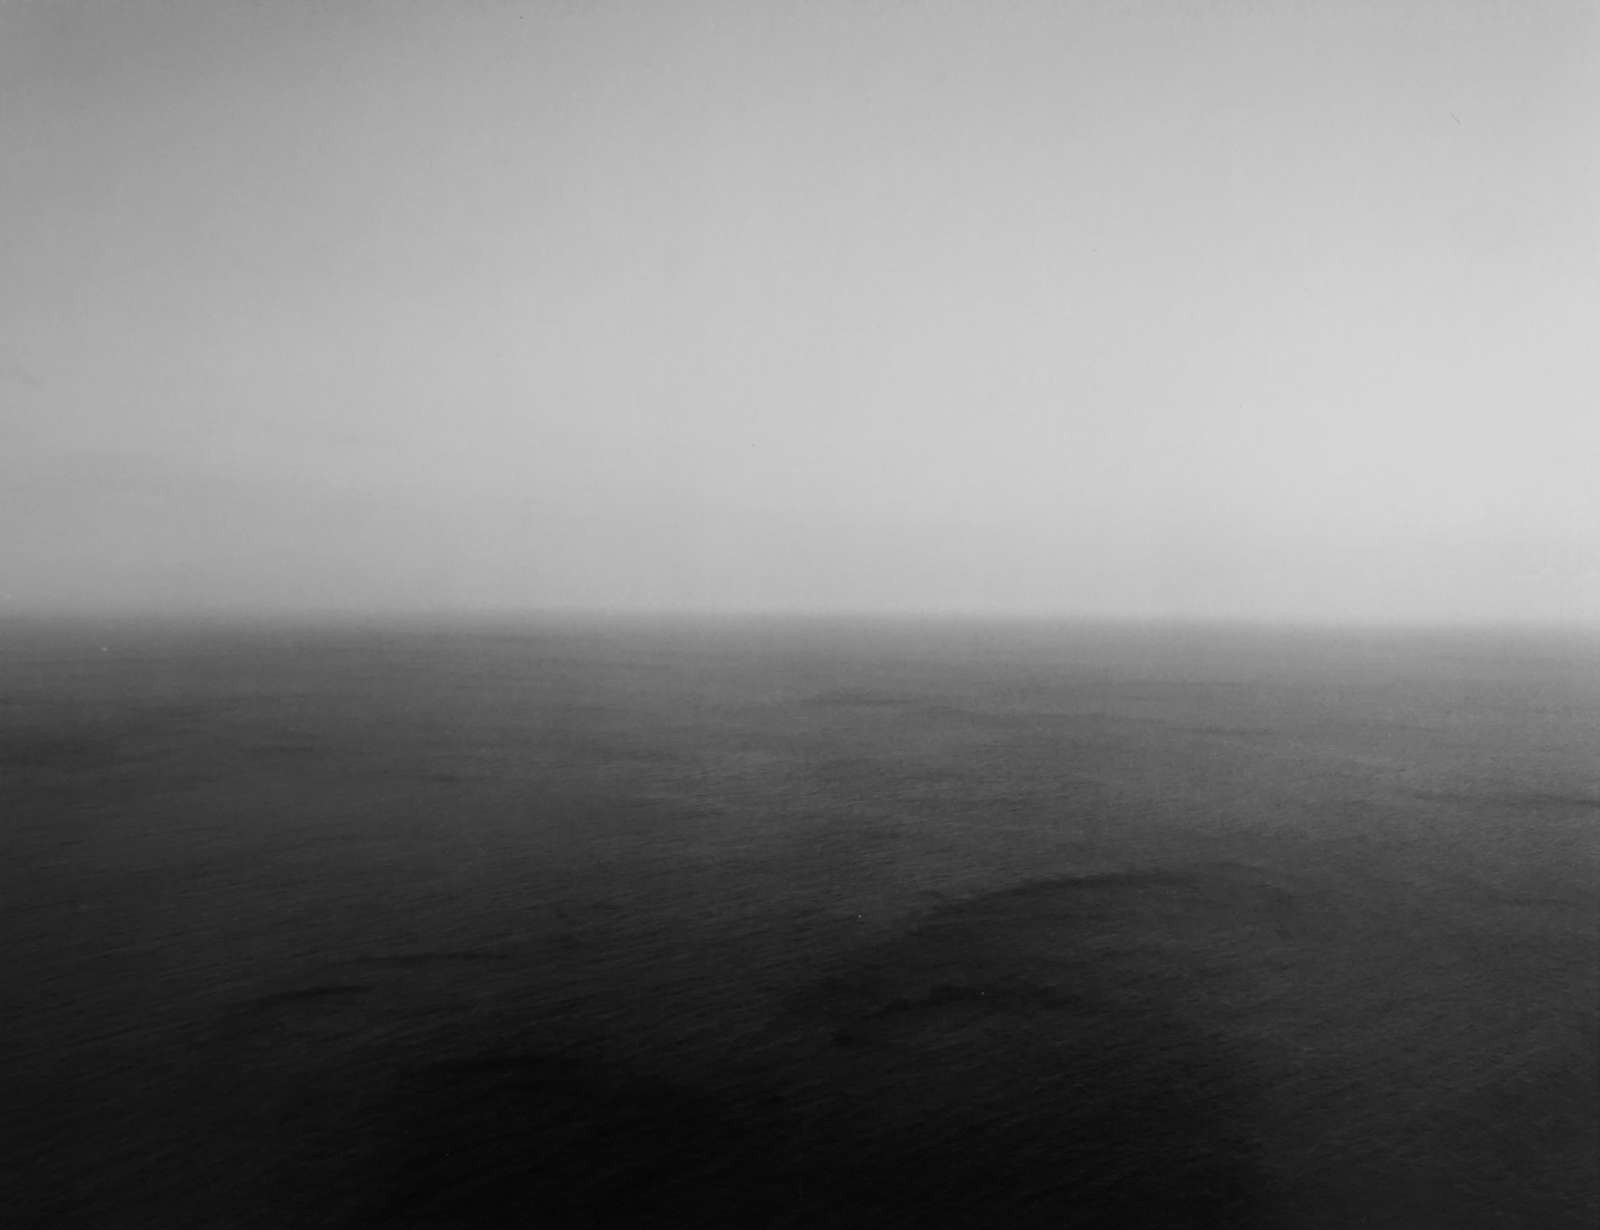 Hiroshi Sugimoto, Sea of Japan, Oki, 307 (from 'Time Exposed' published in 1991), 1987